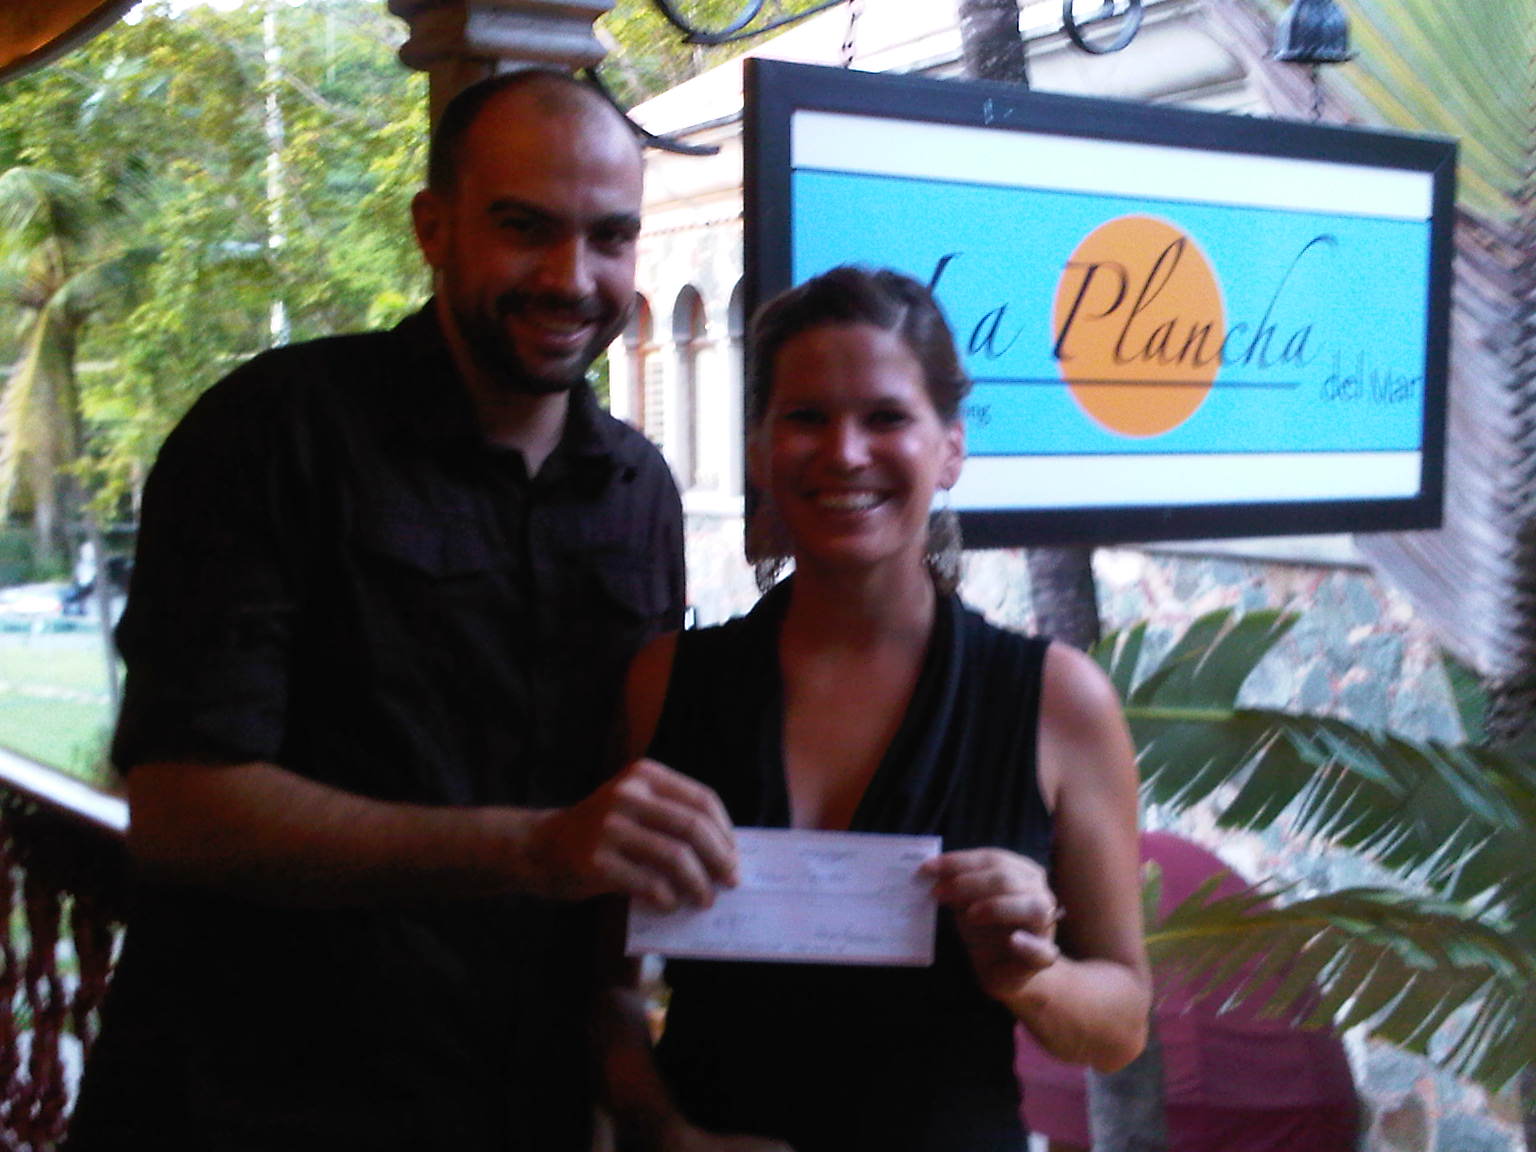 Pictured are Jason Howard, co-owner of La Plancha, and Holly Chipman, team captain